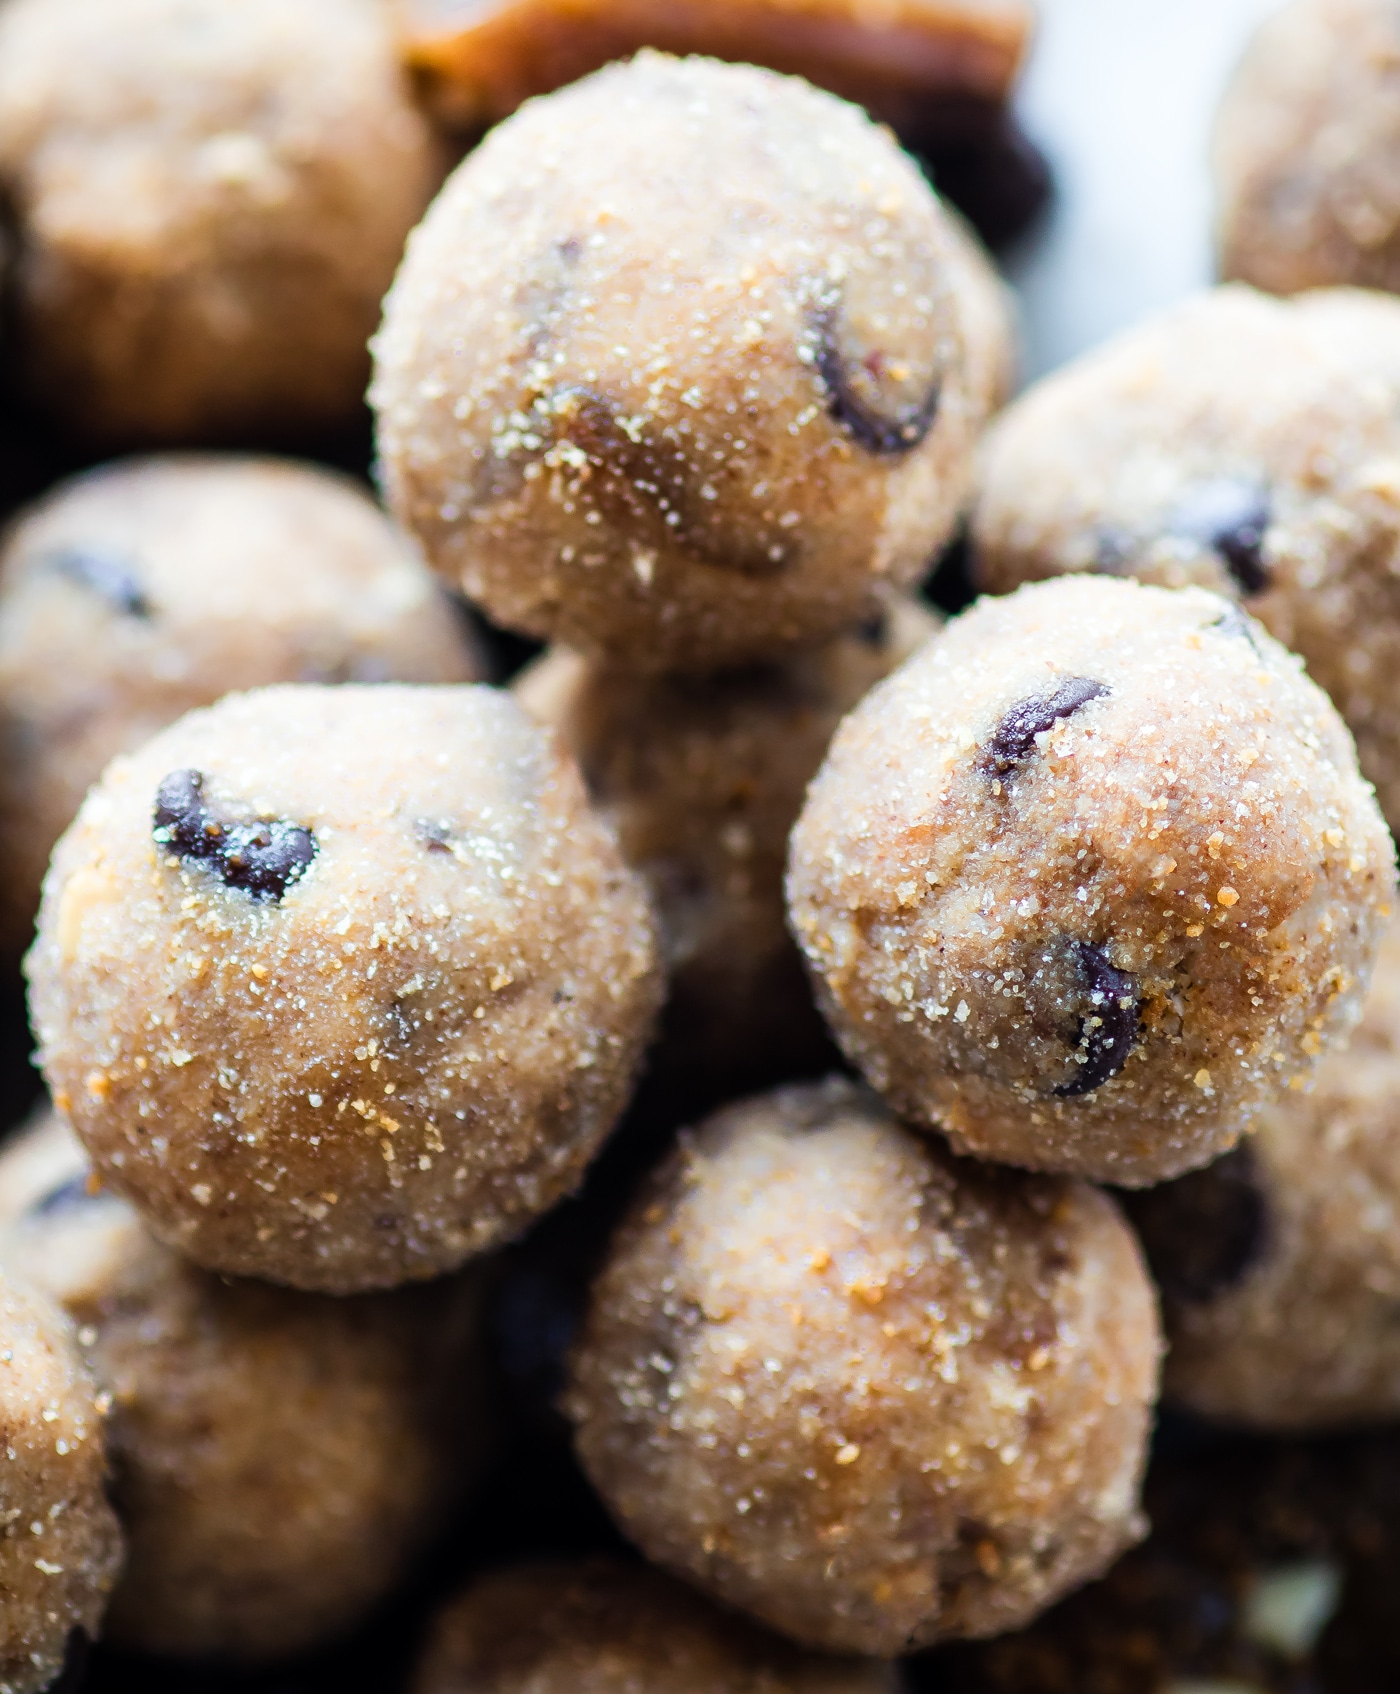 Maple Chocolate Chip Toffee Bites that are paleo friendly, no bake, and just plain delicious! These maple chocolate chip toffee bites make for healthier gluten free "bite size" dessert. Perfect for holidays, snacking, and even breakfast.